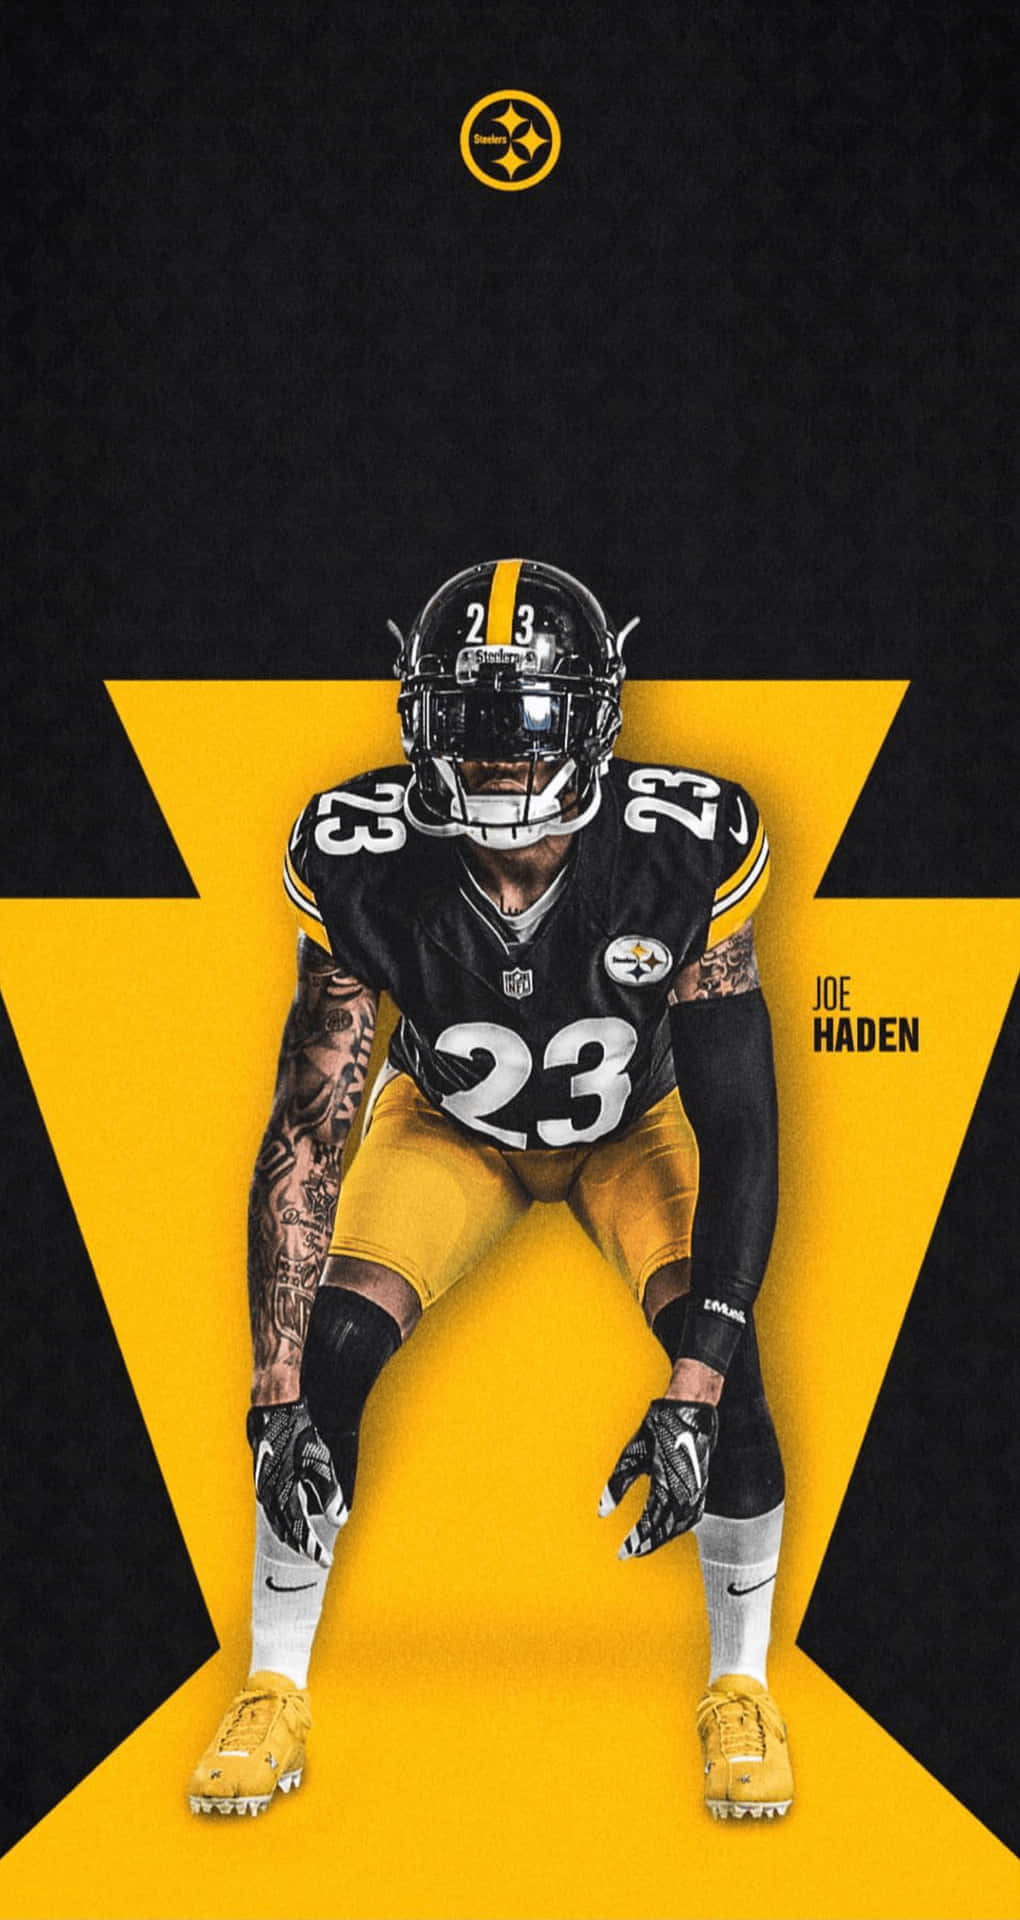 Pittsburgh Steelers on Twitter Some  for your phone WallpaperWednesday  httpstco9Rp5HxCKbe  Twitter